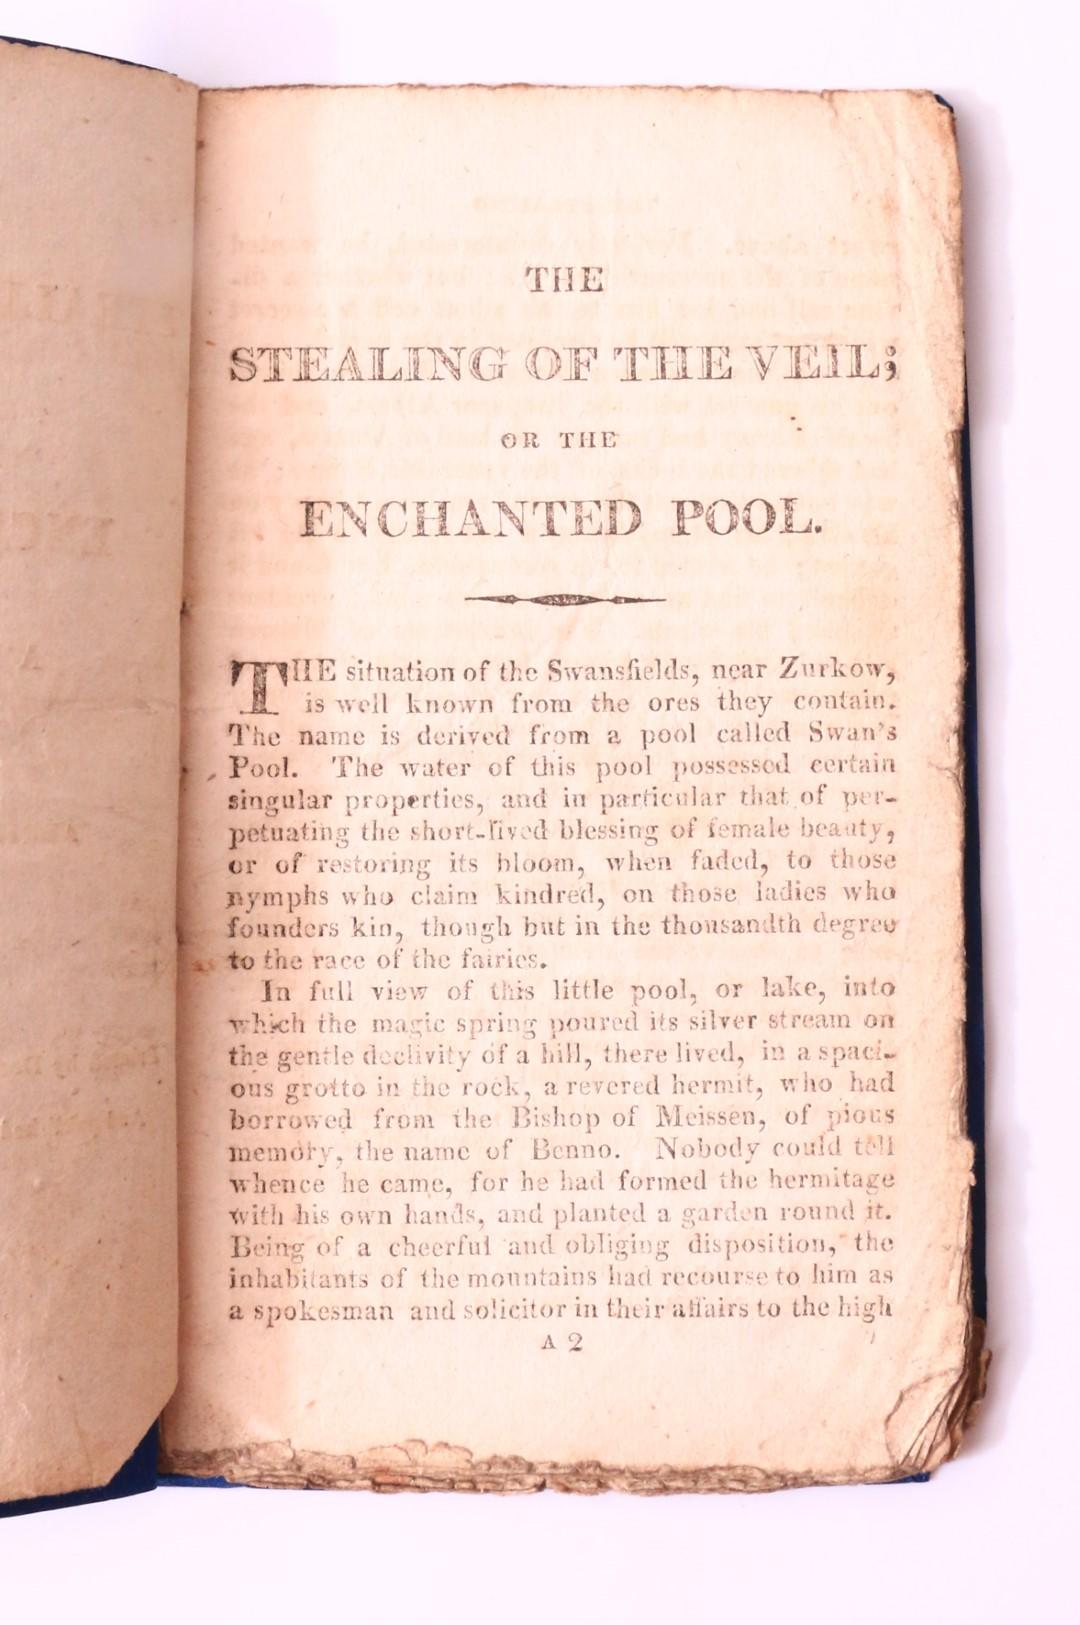 [Anonymous] Johann Karl August Mus?us - The Stealing of the Veil or the Enchanted Pool, A Humourous Tale - Deans and Dunne, 1807, First Edition.